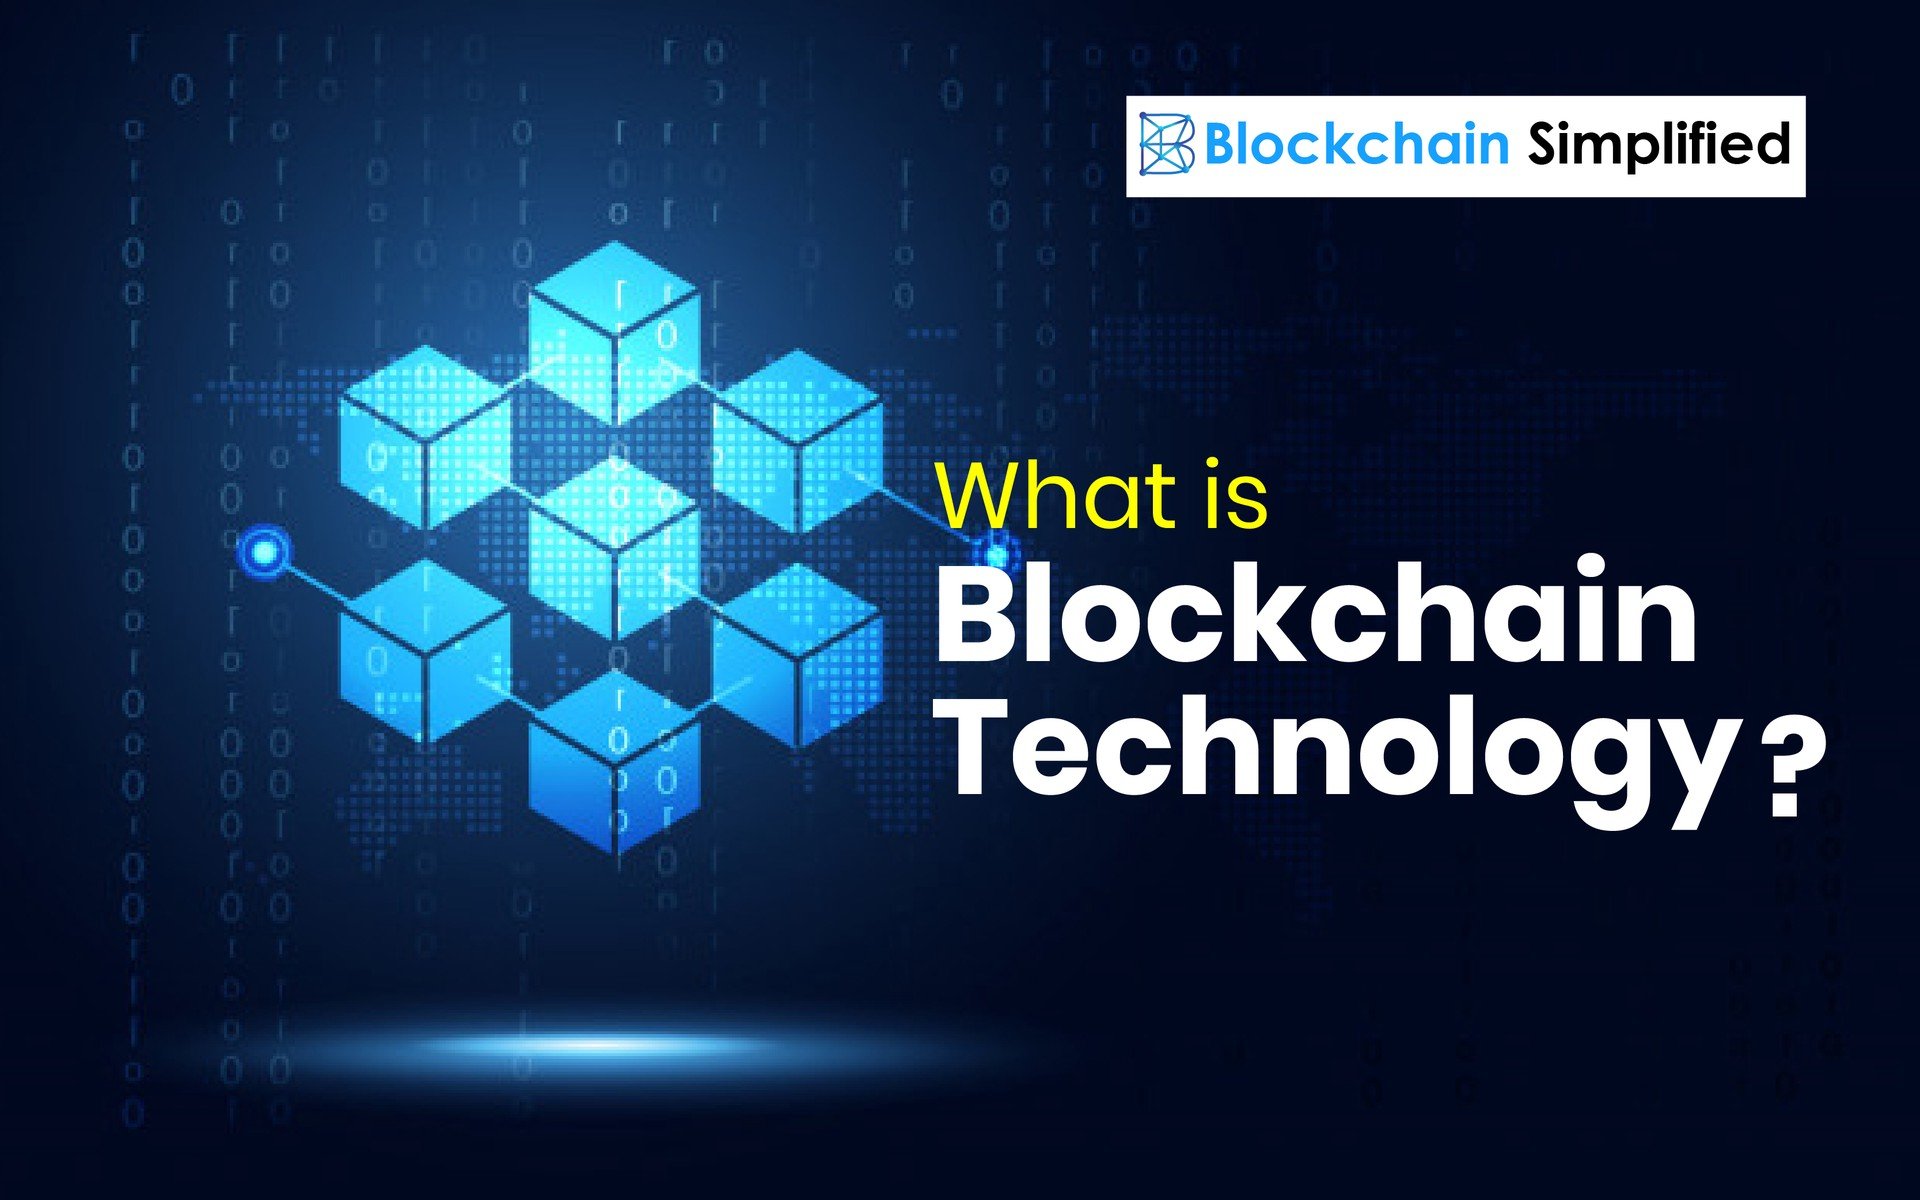 What is the blockchain technology